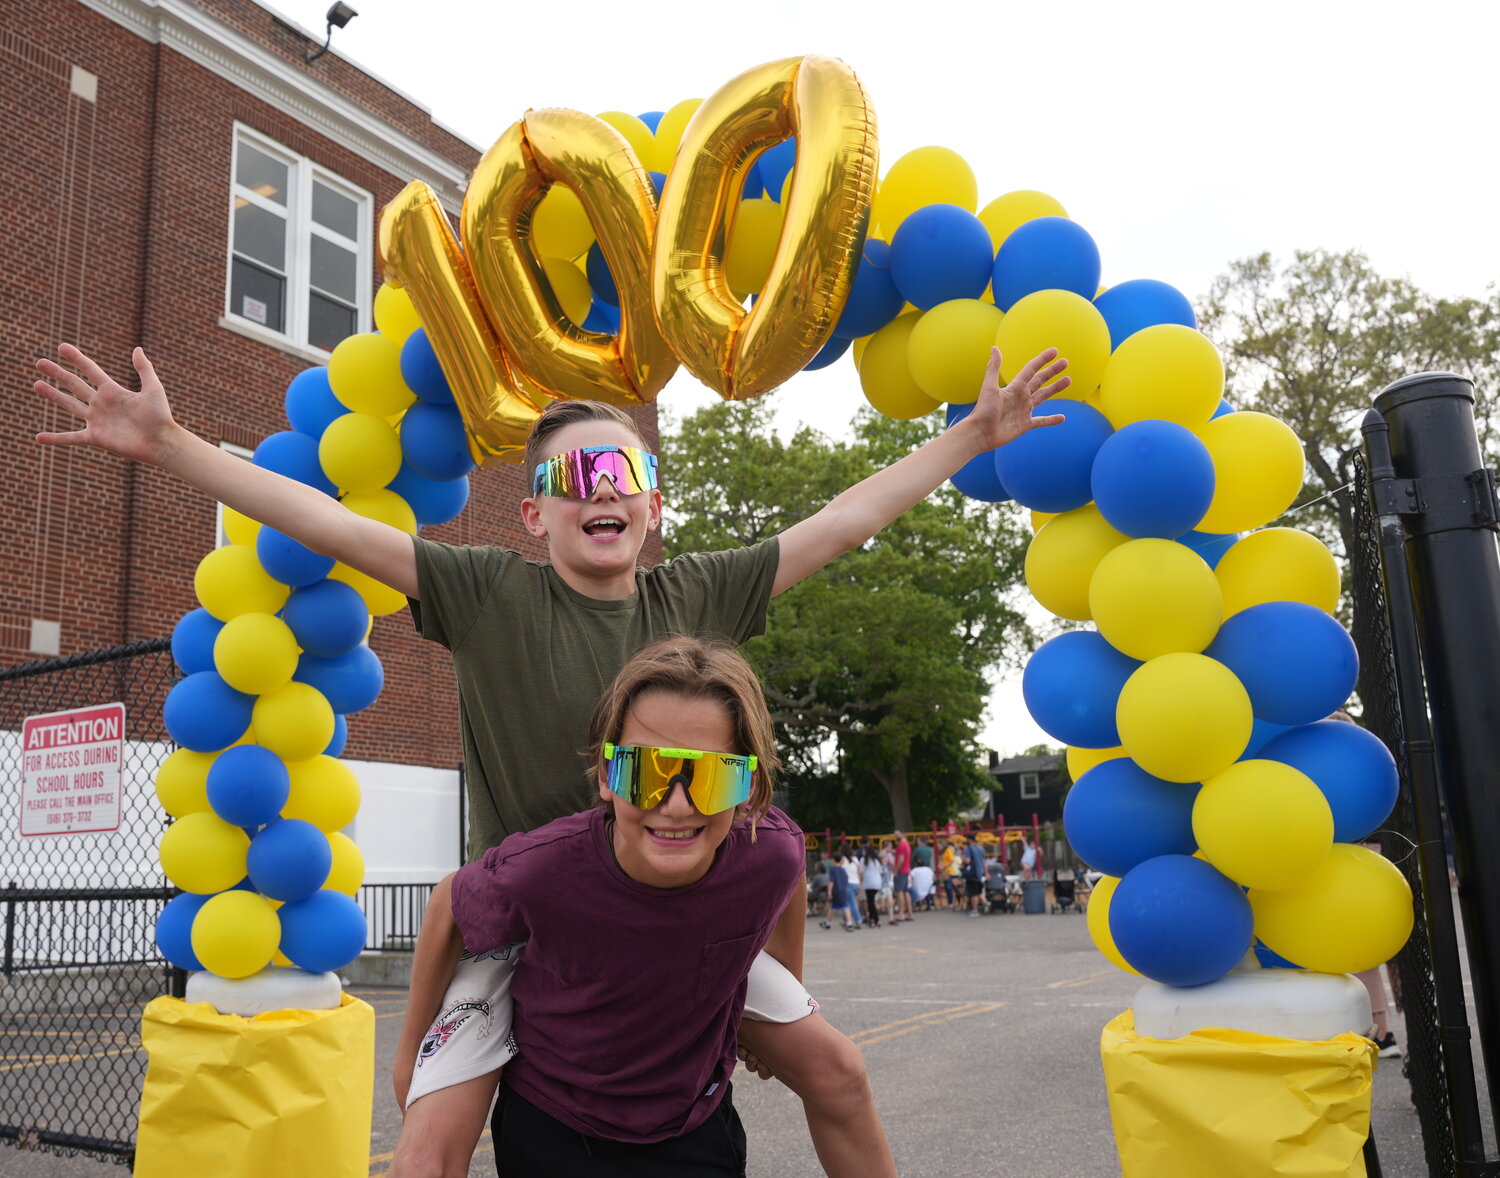 Camp Avenue School, in North Merrick, celebrated its centennial at a special celebration on May 12. Triton and Aris Cimino, both in third grade, couldn’t contain their excitement as they walked through the 100th anniversary balloon display.